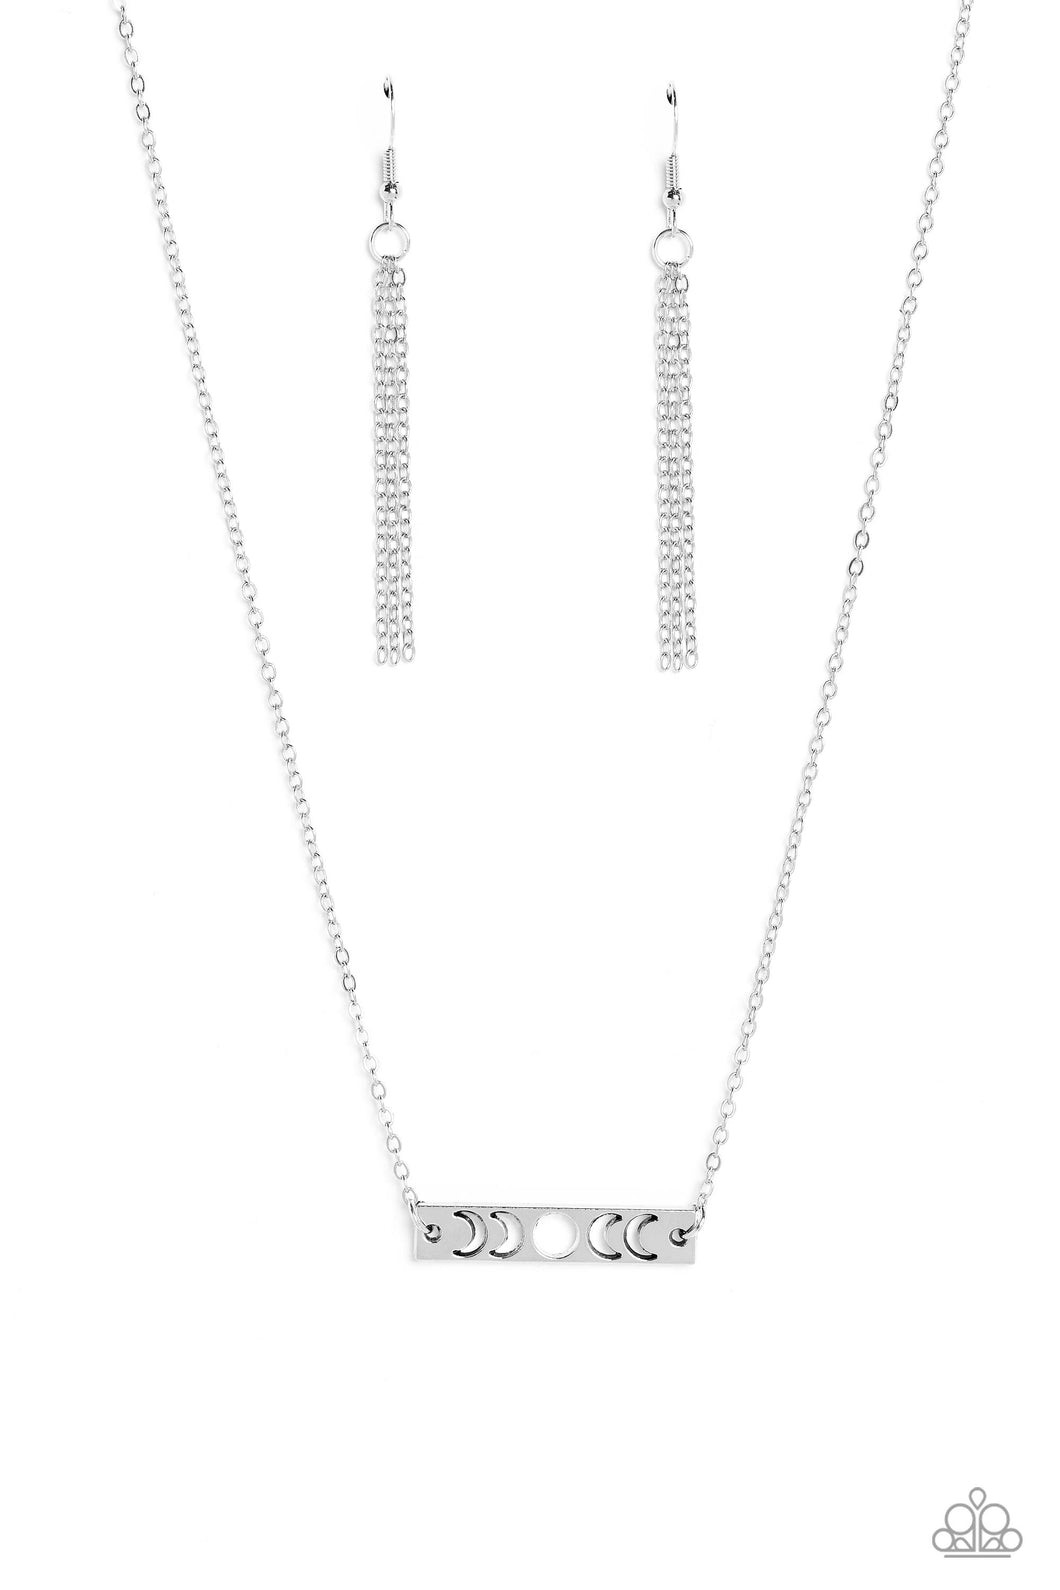 LUNAR or Later - Silver - Paparazzi Necklace